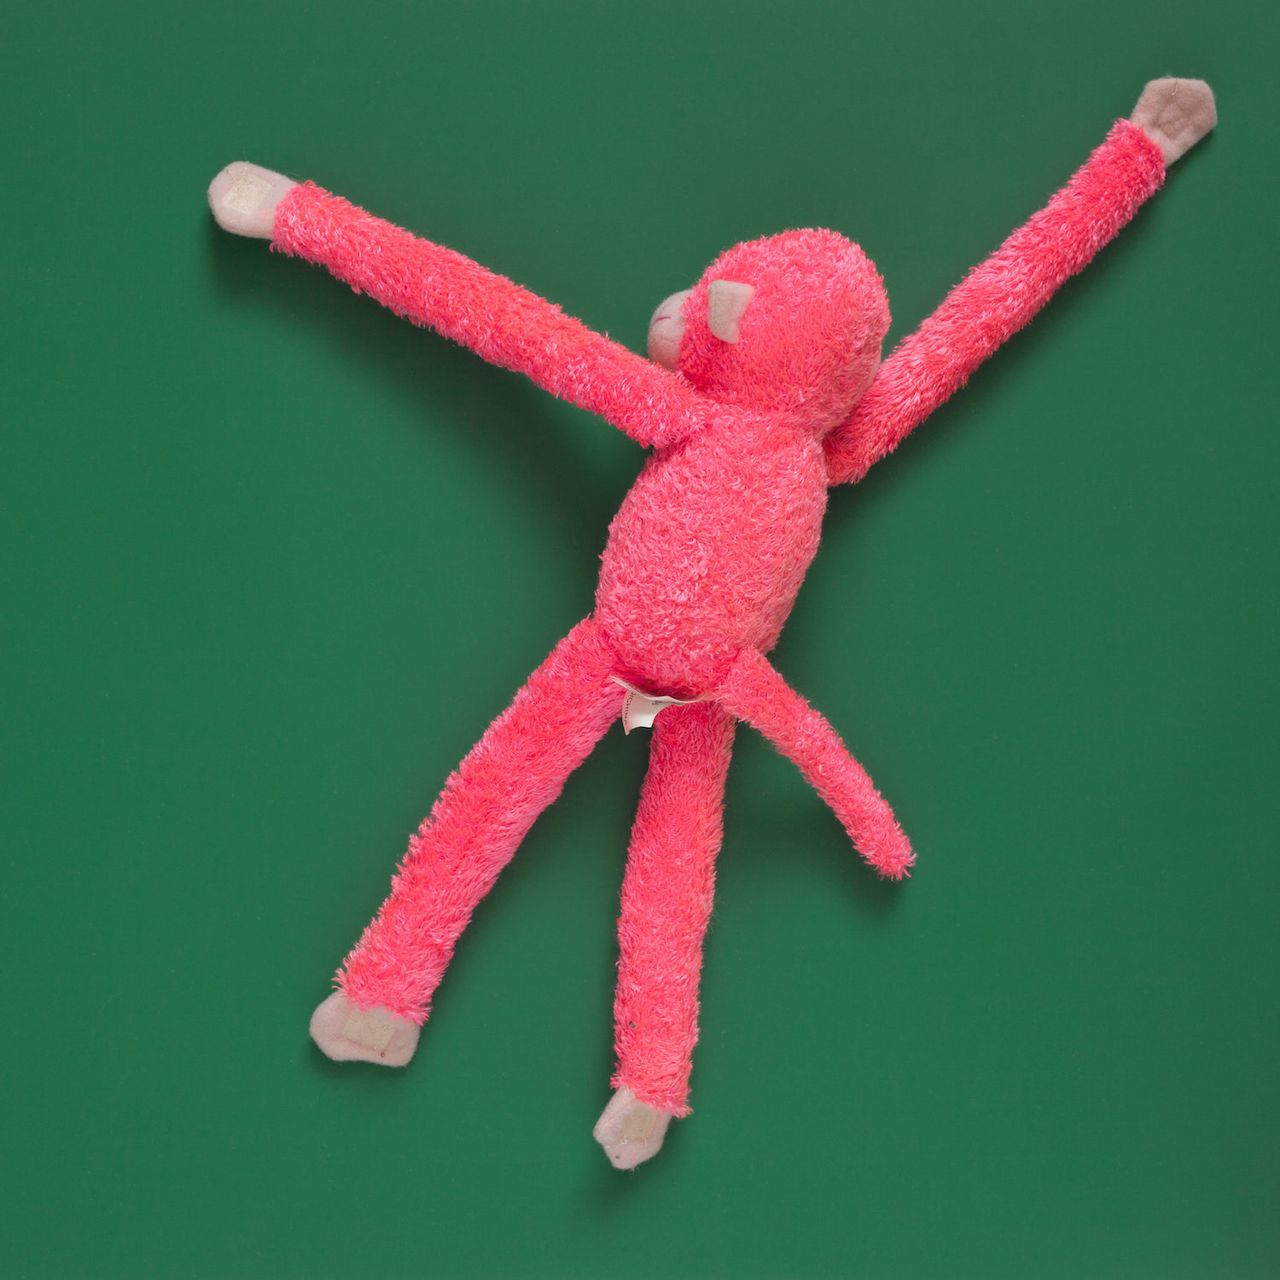 Tom Kiefer, a photographer in Arizona, spent 11 years (2003-2014) as a janitor at a Customs and Border Protection facility. He collected the items that agents confiscated from migrants and threw out, and he photographed them. "Pink Monkey," shared with HuffPost, is part of his collection "El Sueño Americano - The American Dream" and can be found at http://tomkiefer.com and https://www.instagram.com/tomkiefer.photographer/.